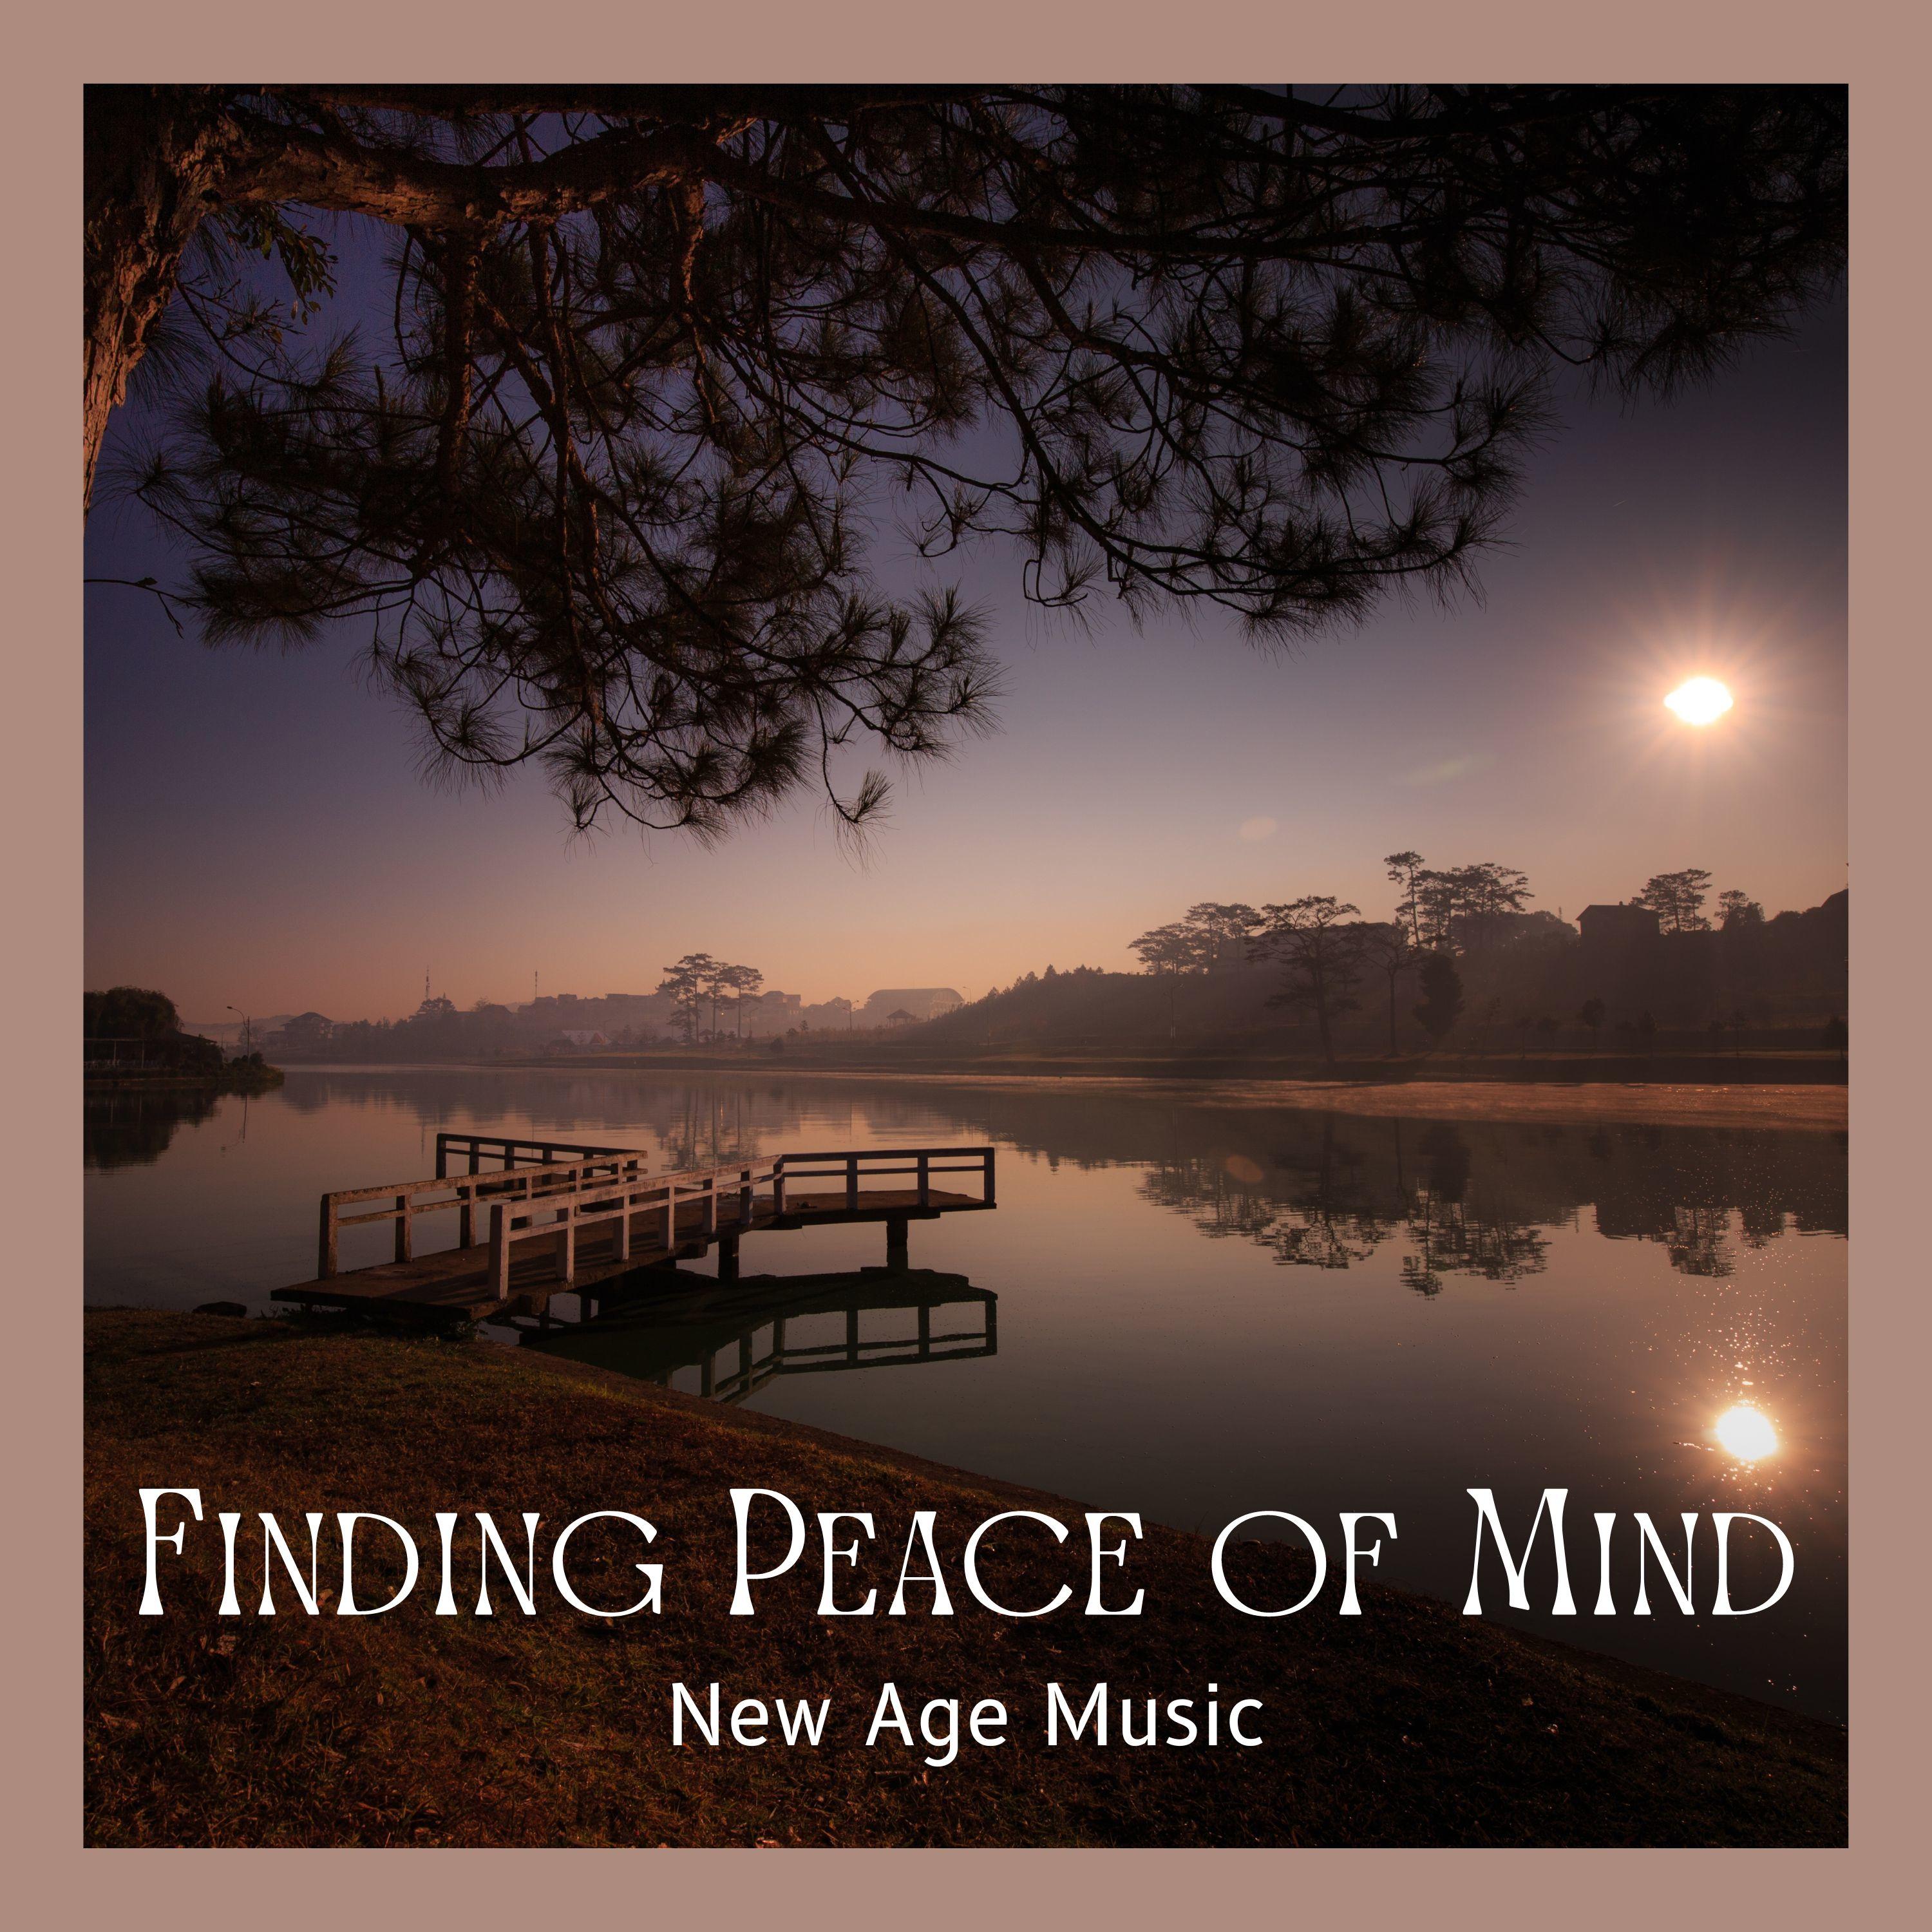 New age music - Finding Peace of Mind